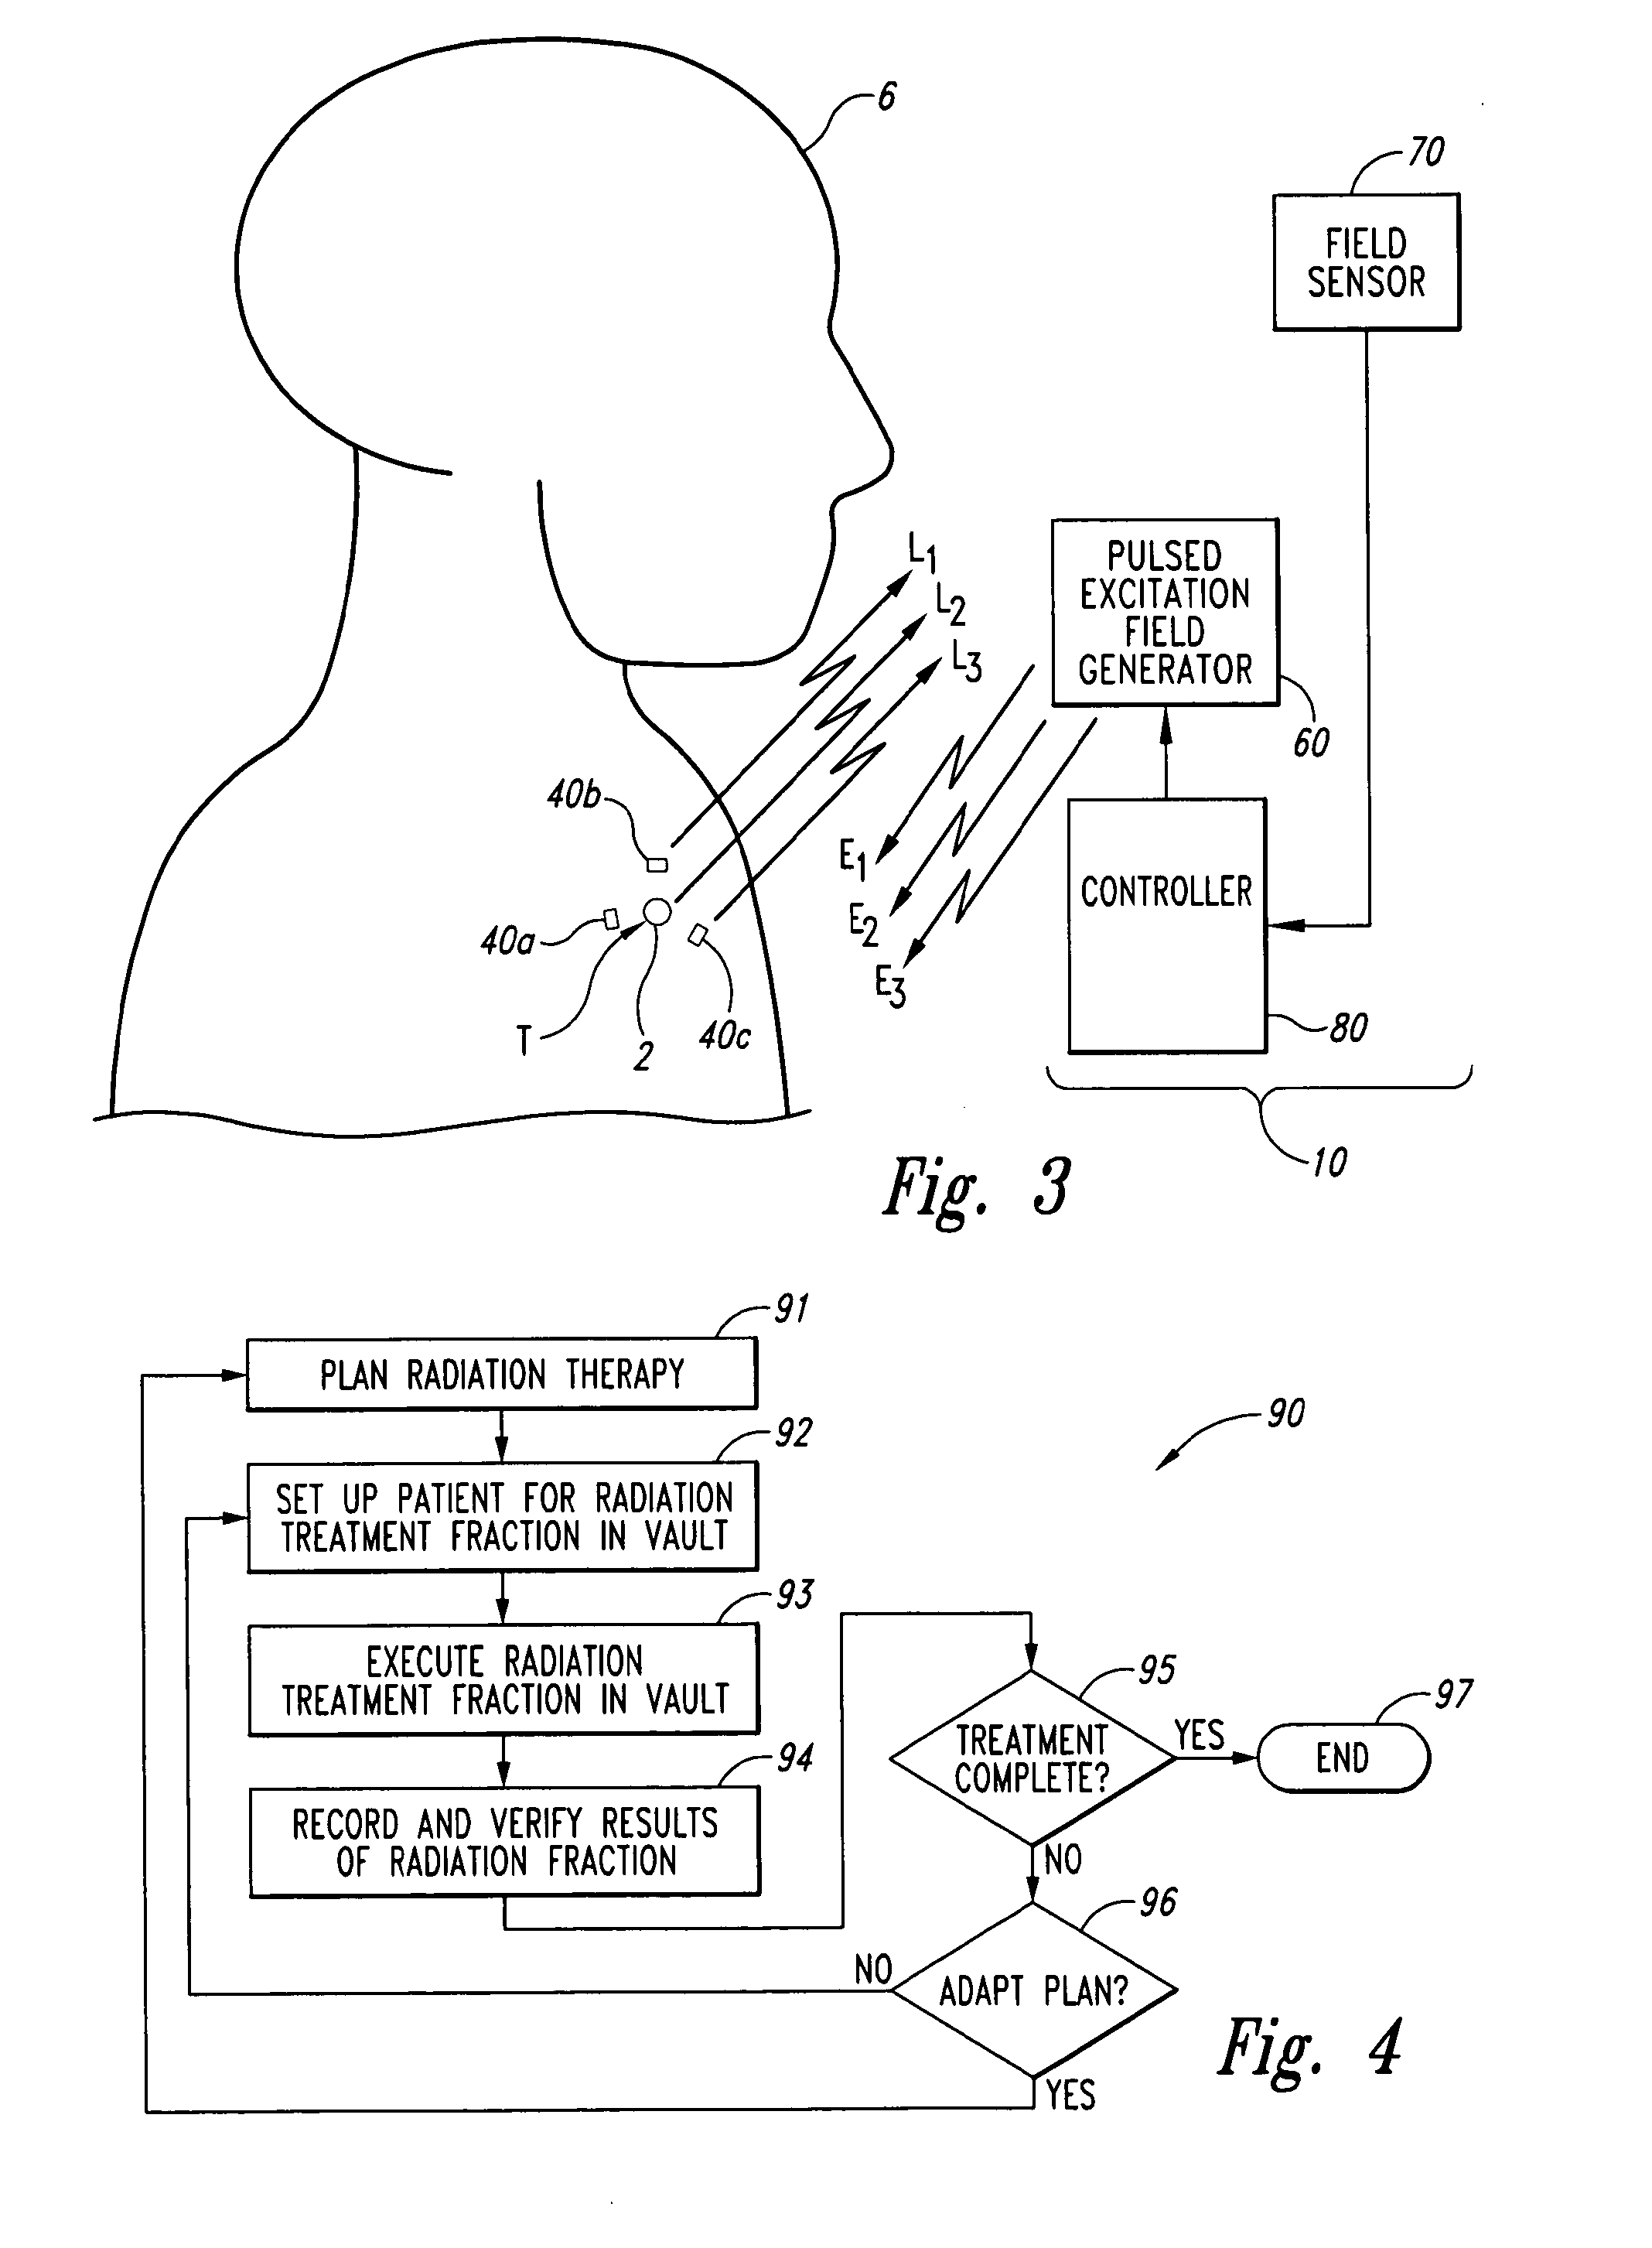 Systems and methods for real-time tracking of targets in radiation therapy and other medical applications